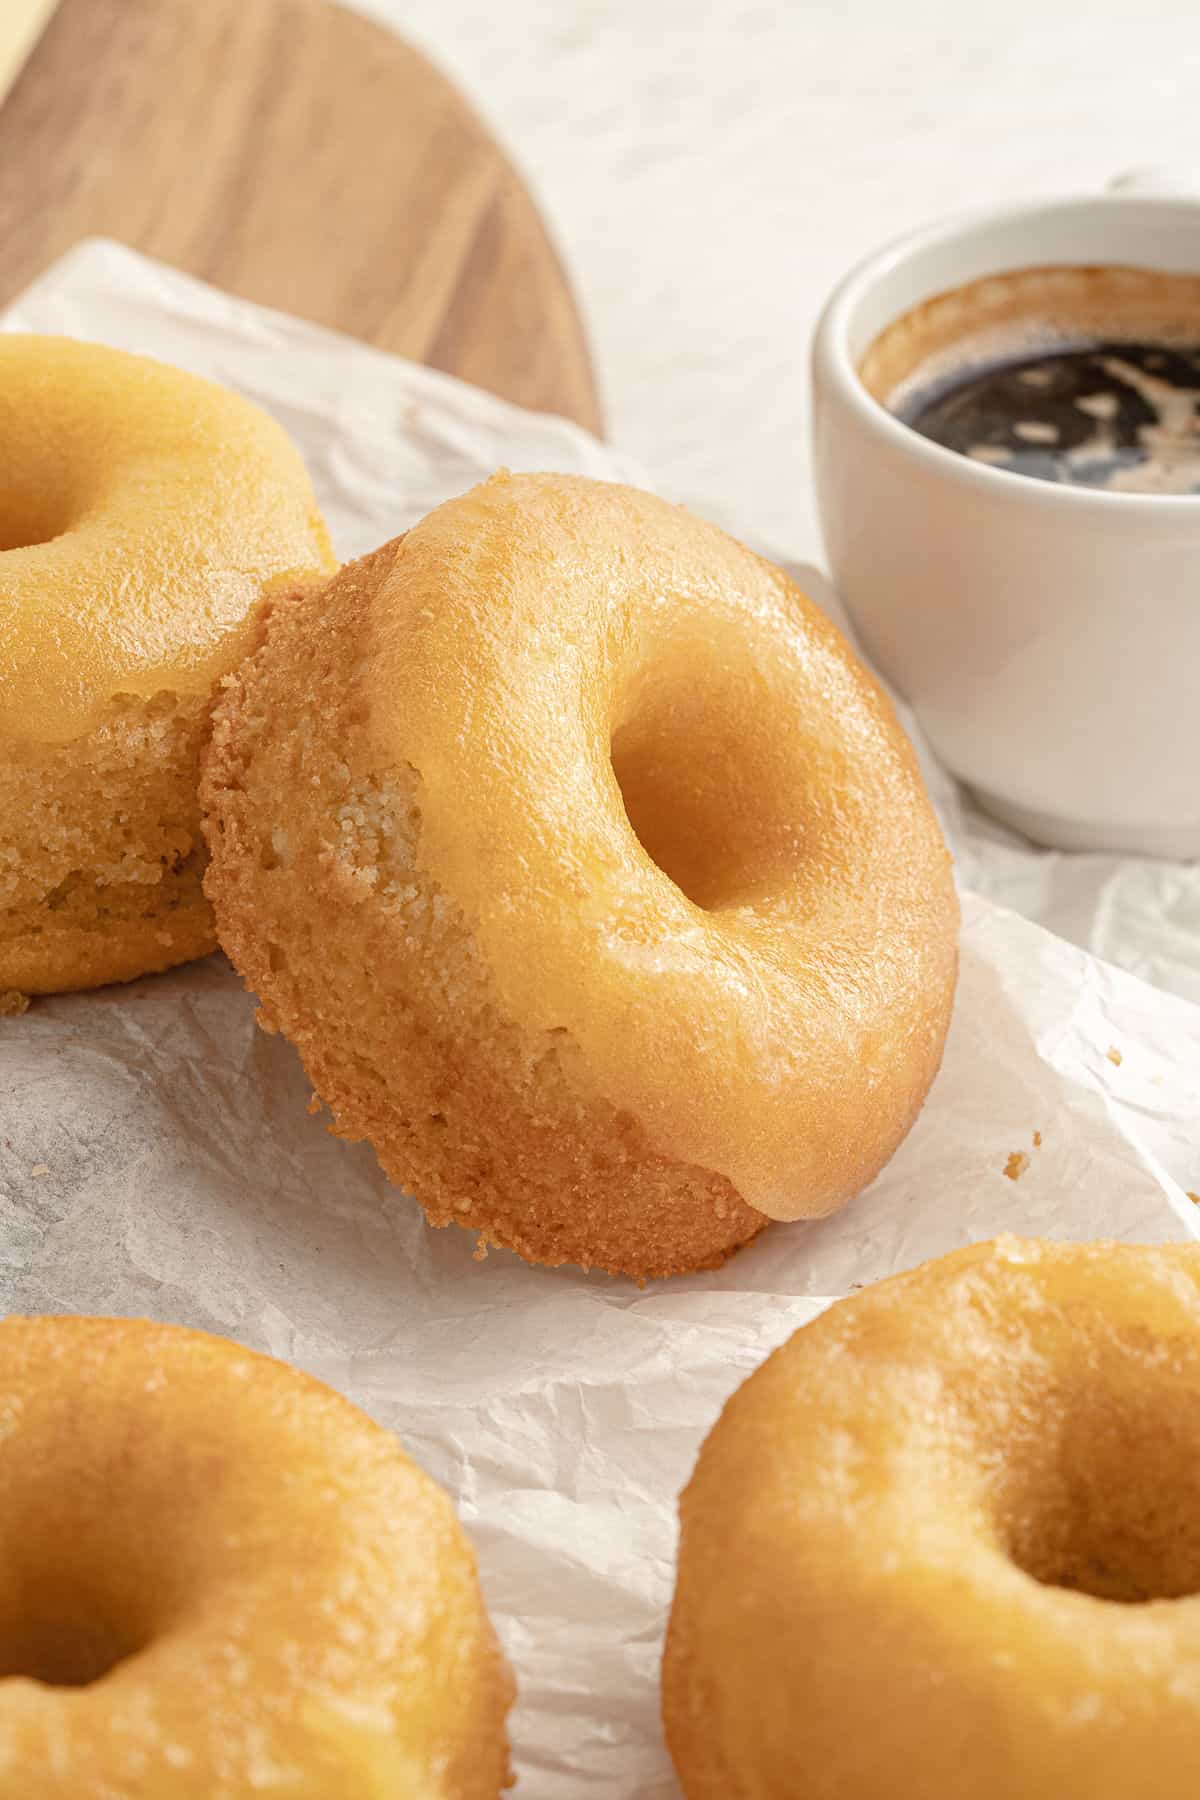 gluten free lemon donuts on parchment paper, served with espresso